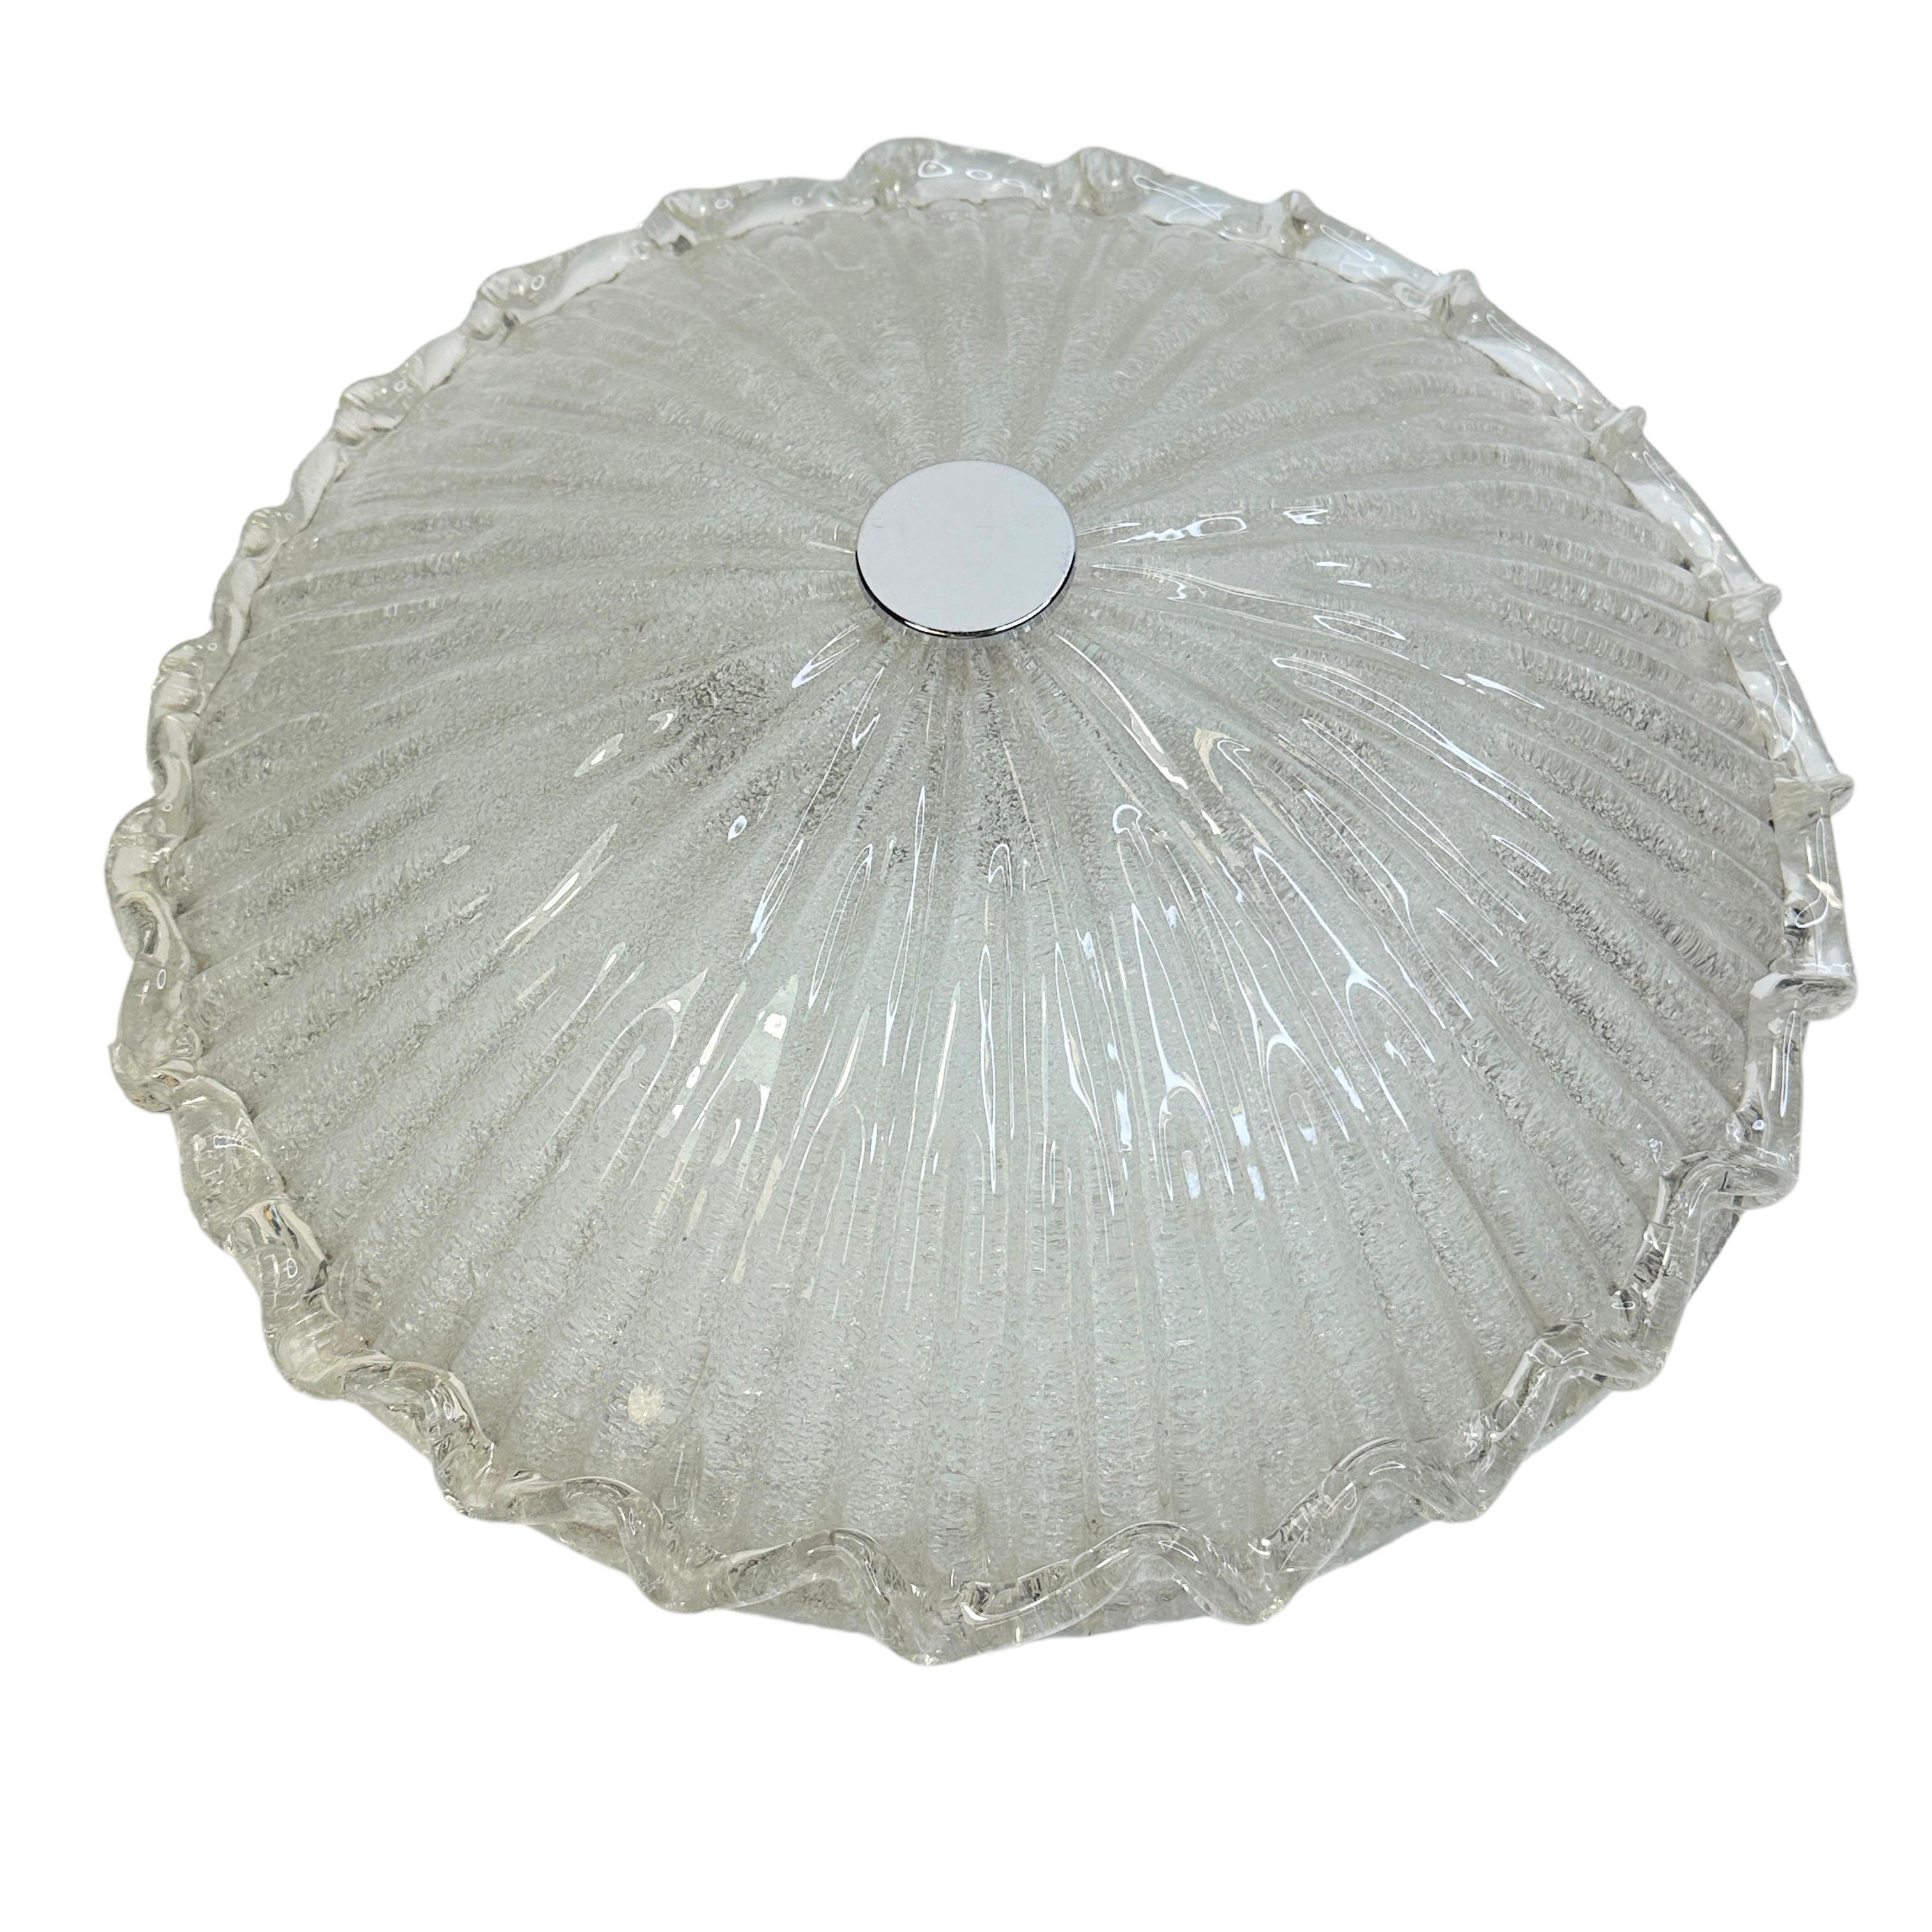 This exquisite flush mount chandelier attributed to the legendary atelier of Venini in Italy, circa 1970s. It features a subtly concave and channeled hand blown thick and heavy Murano glass shade. The glass shade is made of clear glass in ice